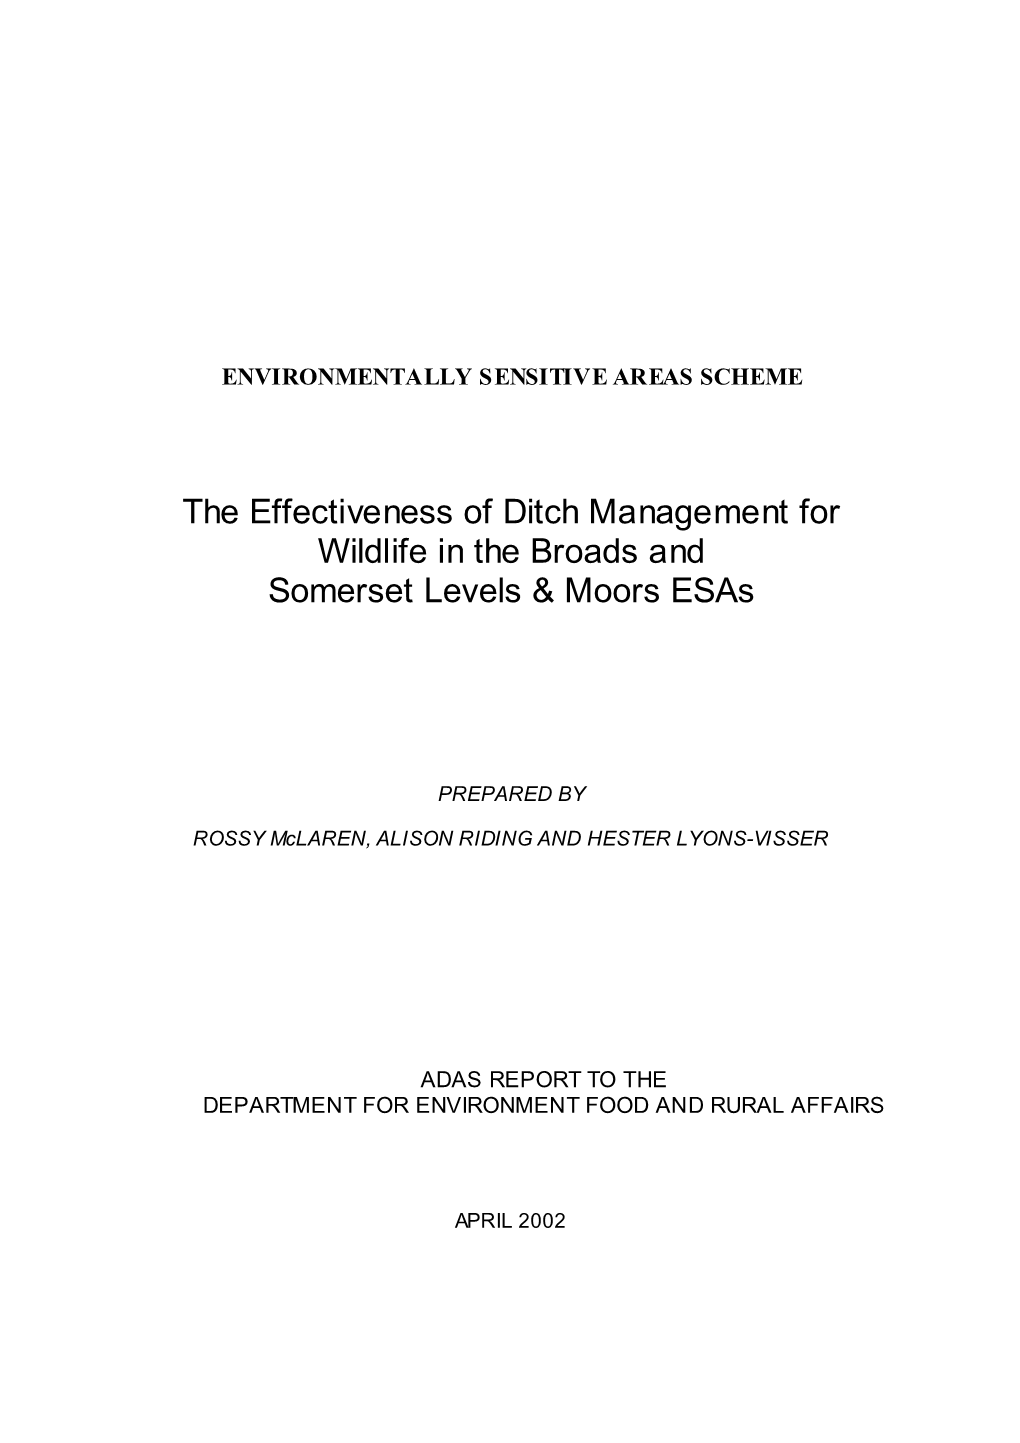 The Effectiveness of Ditch Management for Wildlife in the Broads and Somerset Levels & Moors Esas